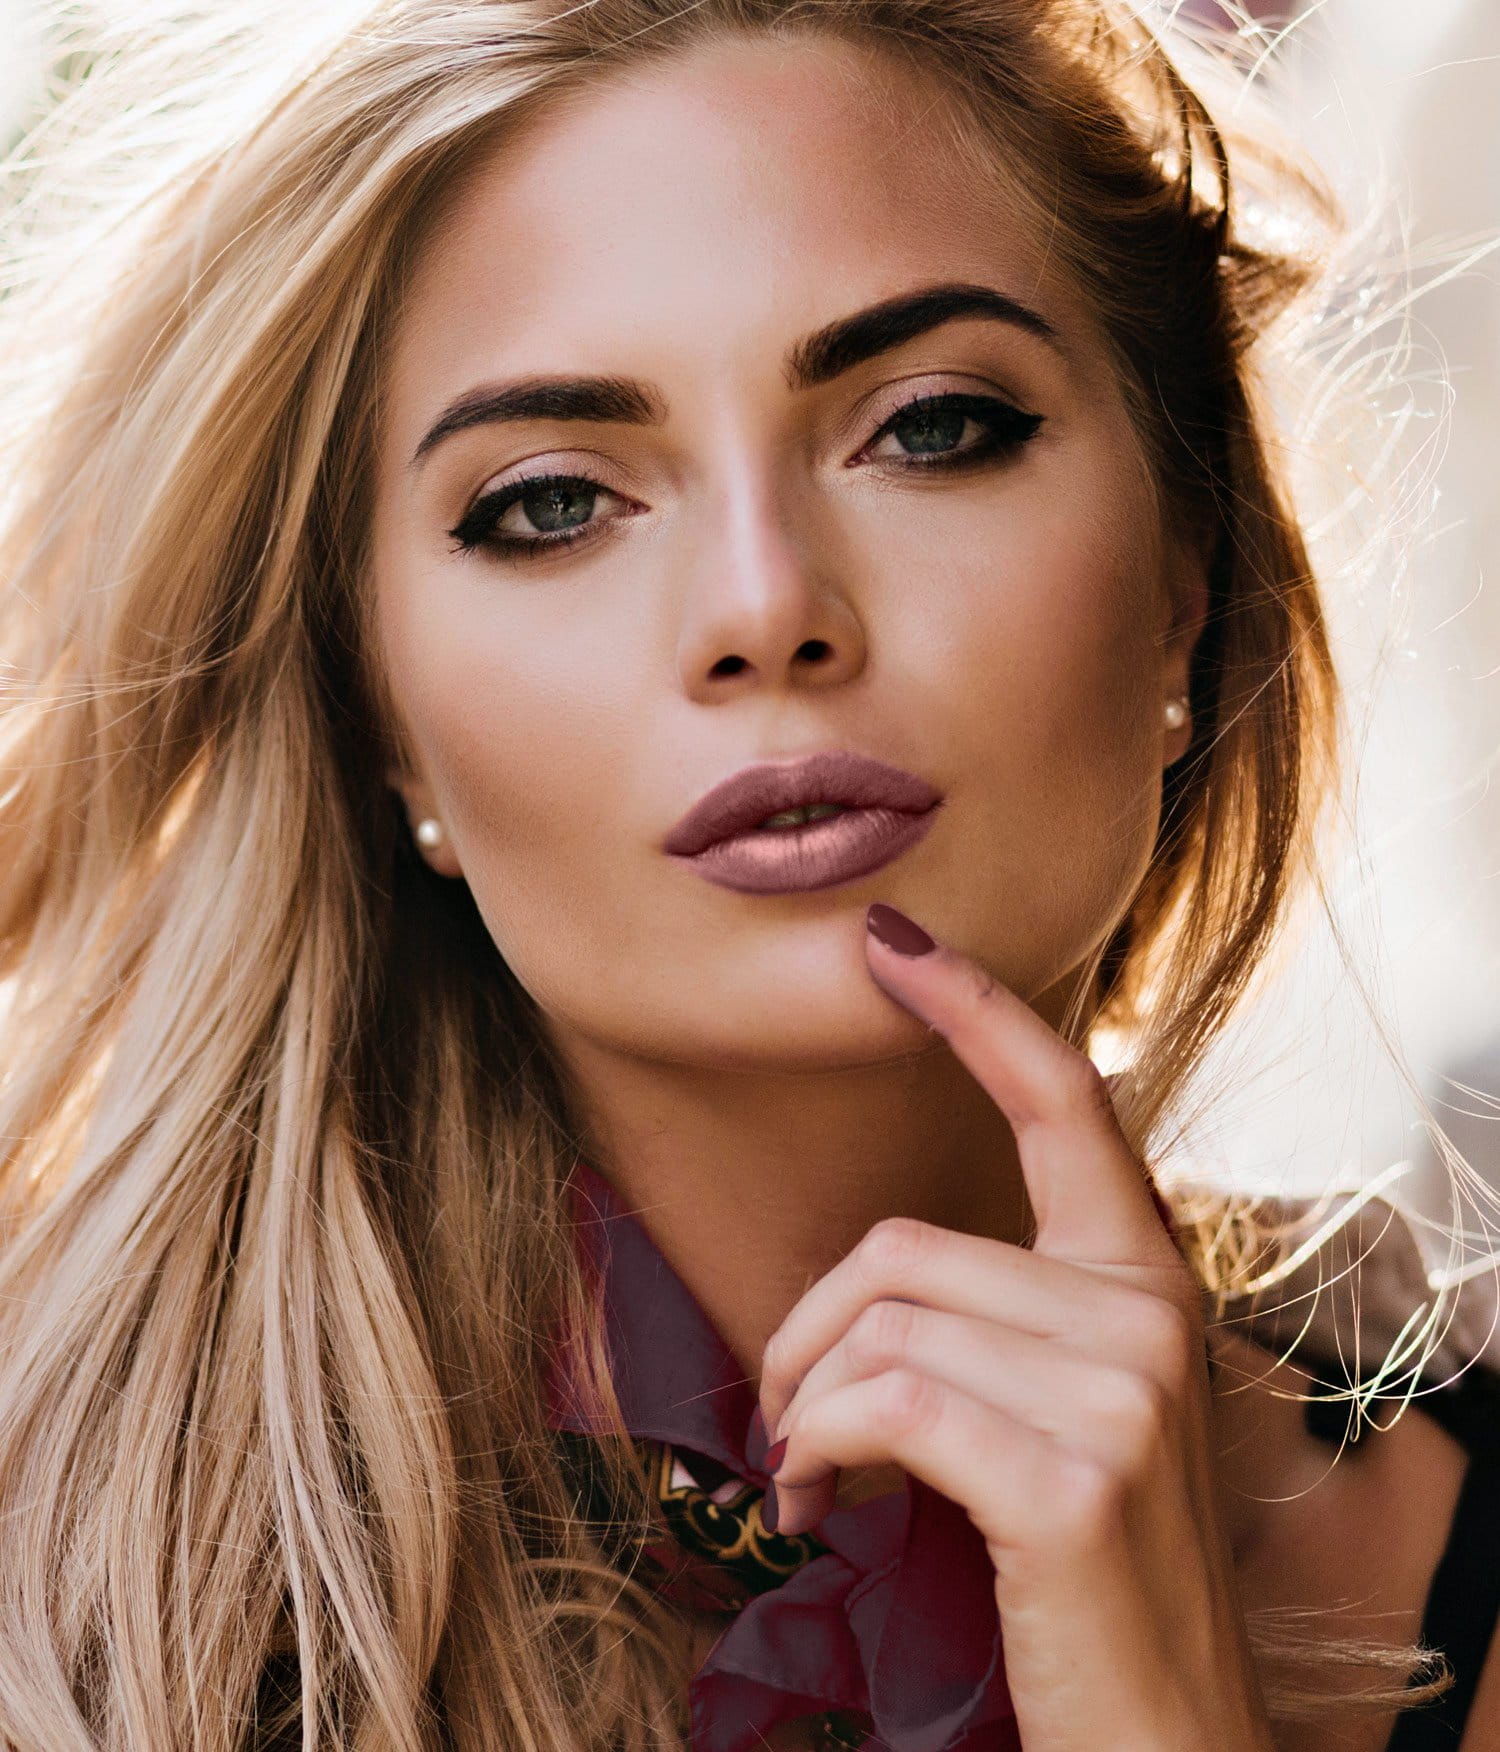 blonde Newport Beach Cosmetic Dermatology patient model with pink lipstick